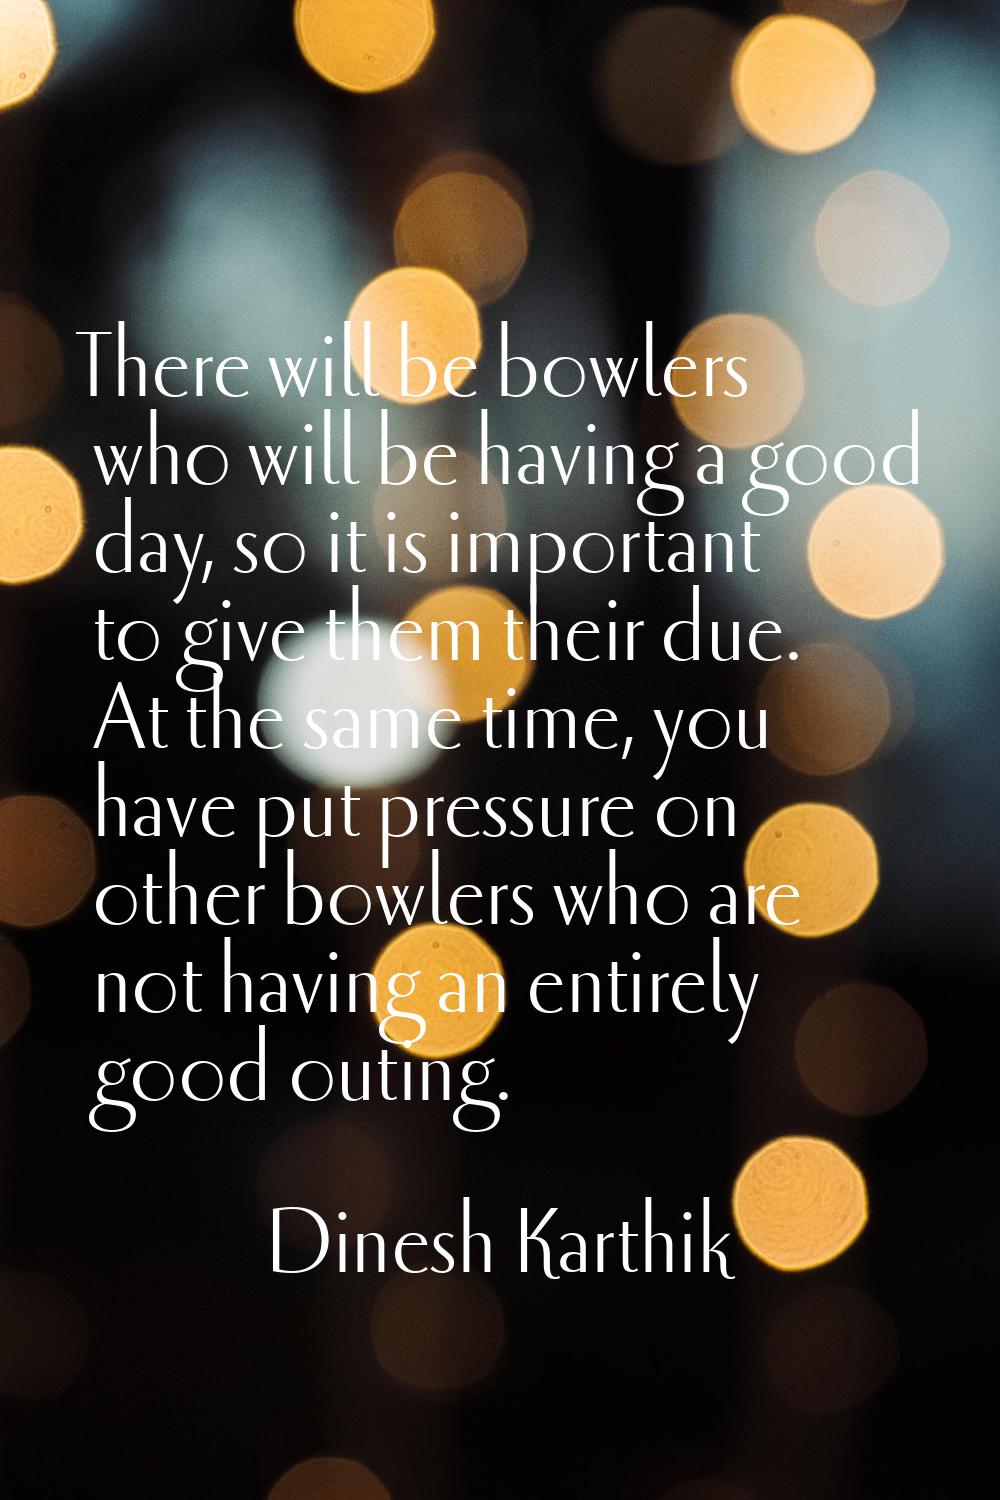 There will be bowlers who will be having a good day, so it is important to give them their due. At 